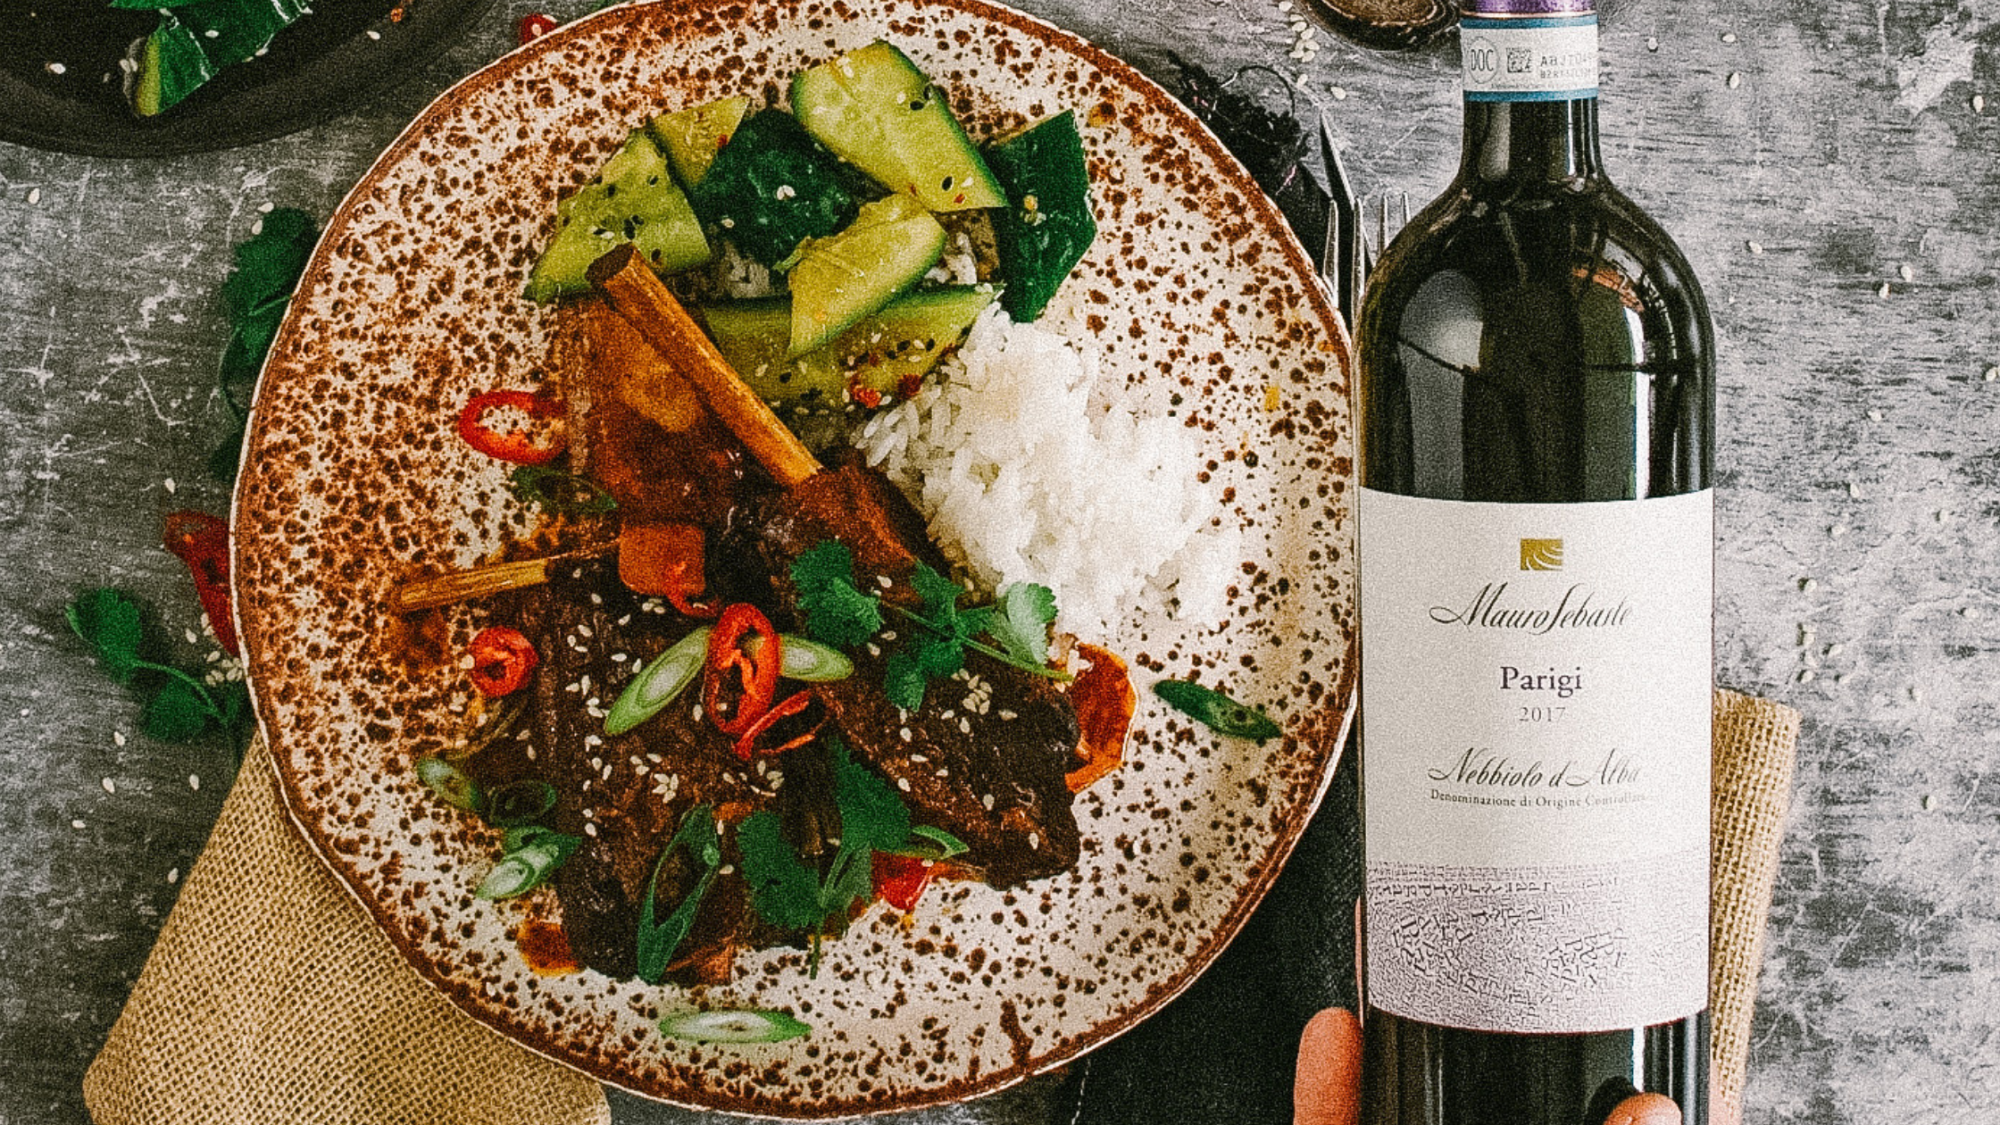 A meal of Asian Style Slow Cooked Ribs served with a bottle of Nebbiolo